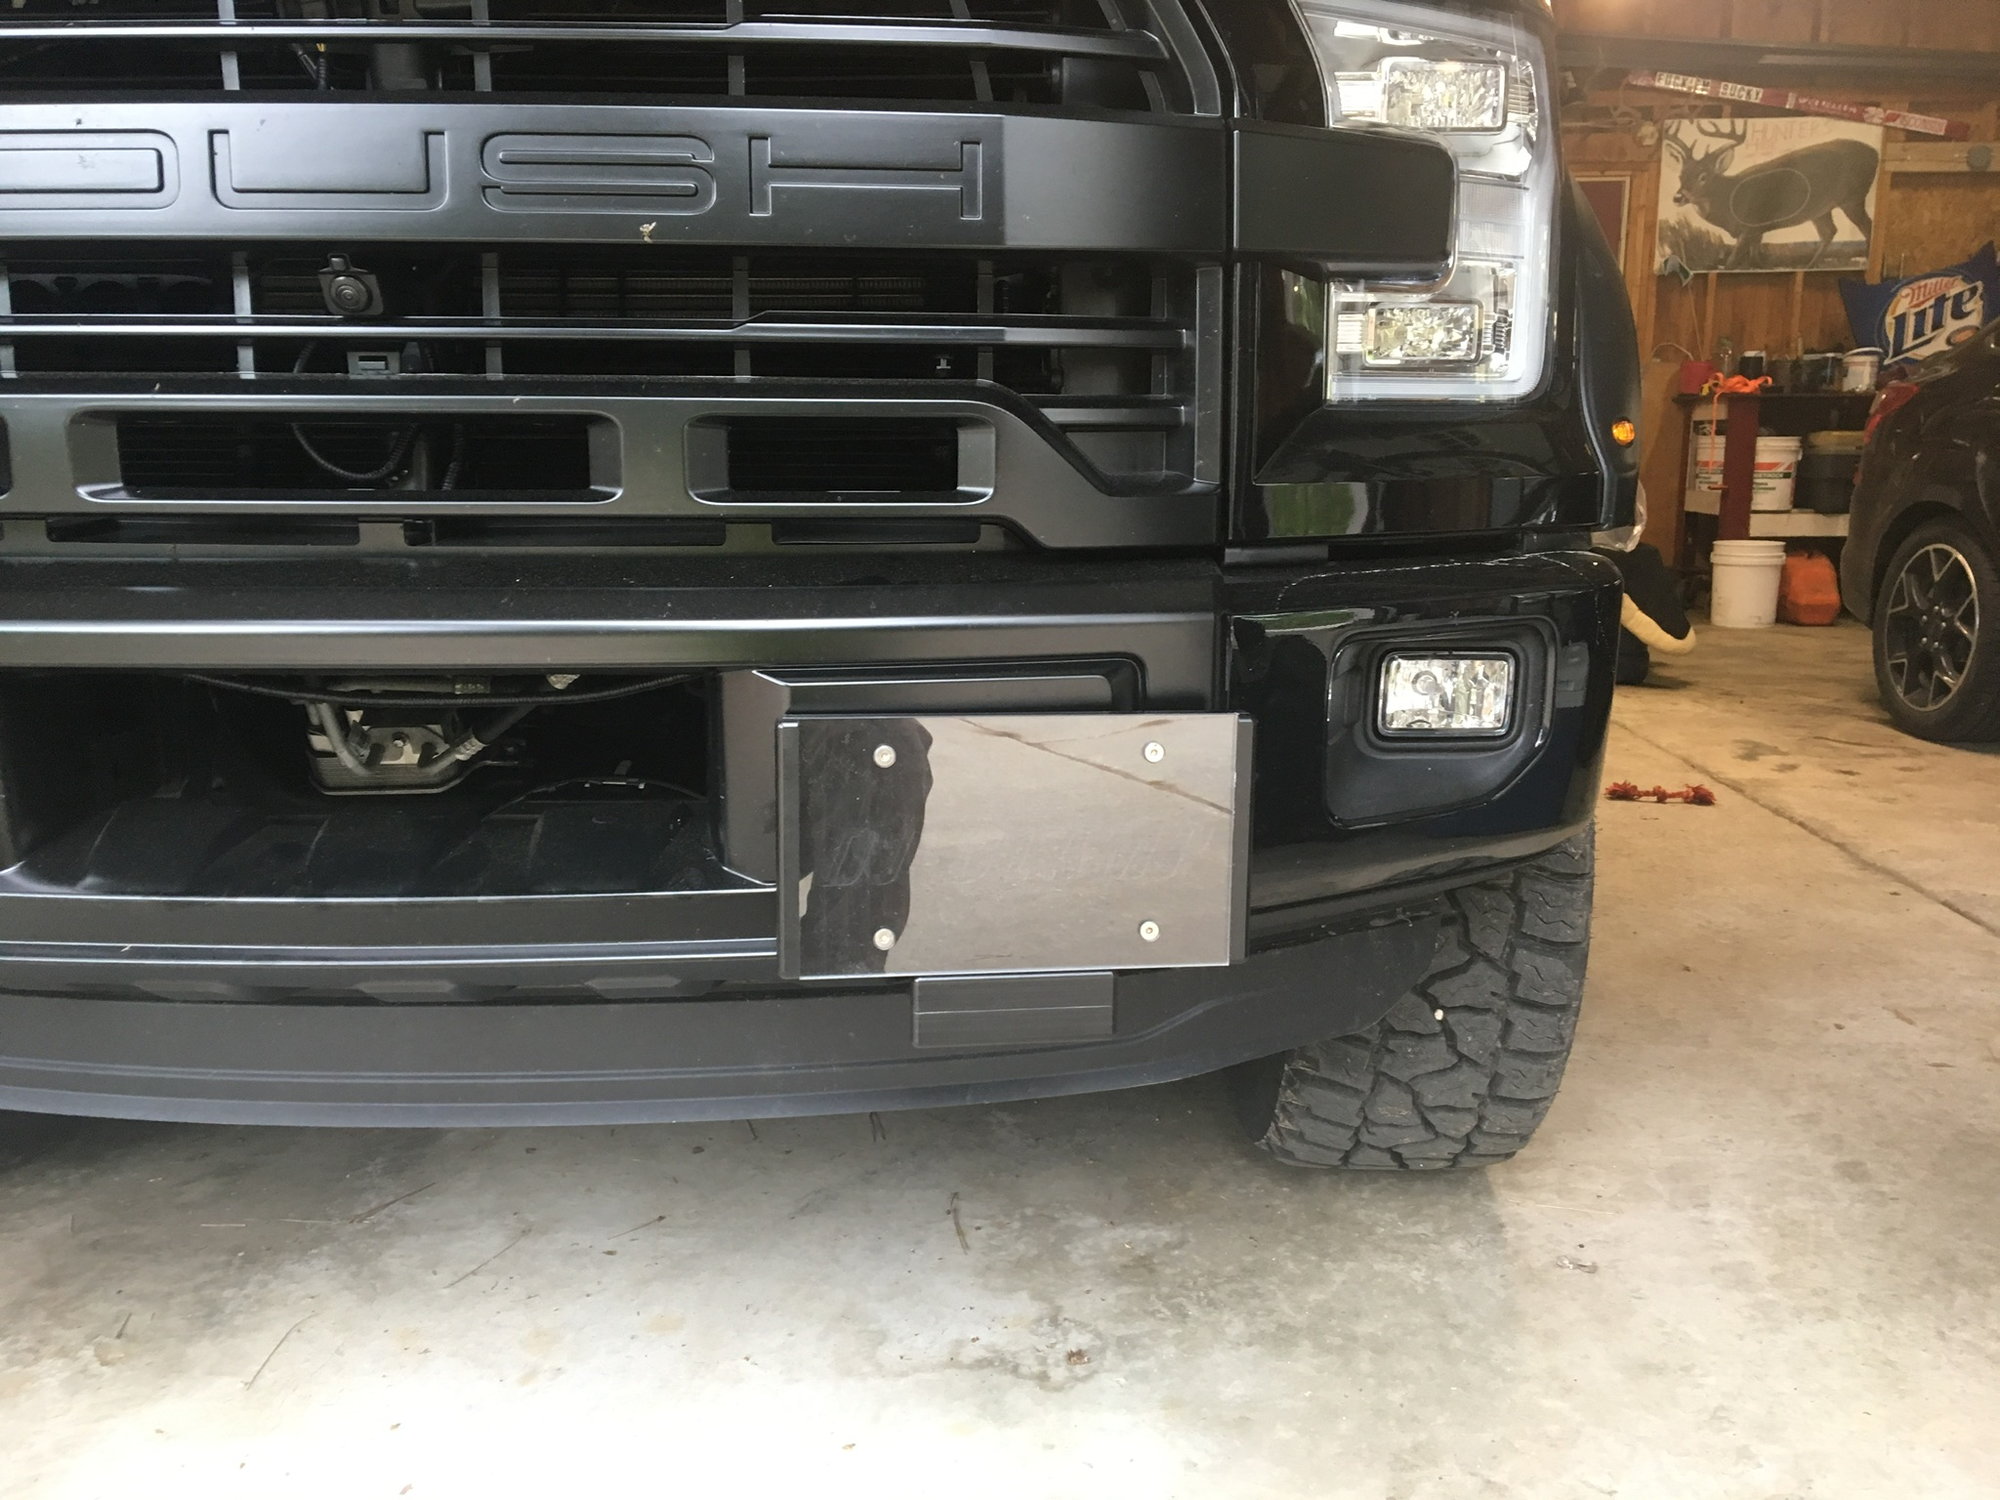 2017 Raptor Front license plate location Page 2 Ford F150 Forum